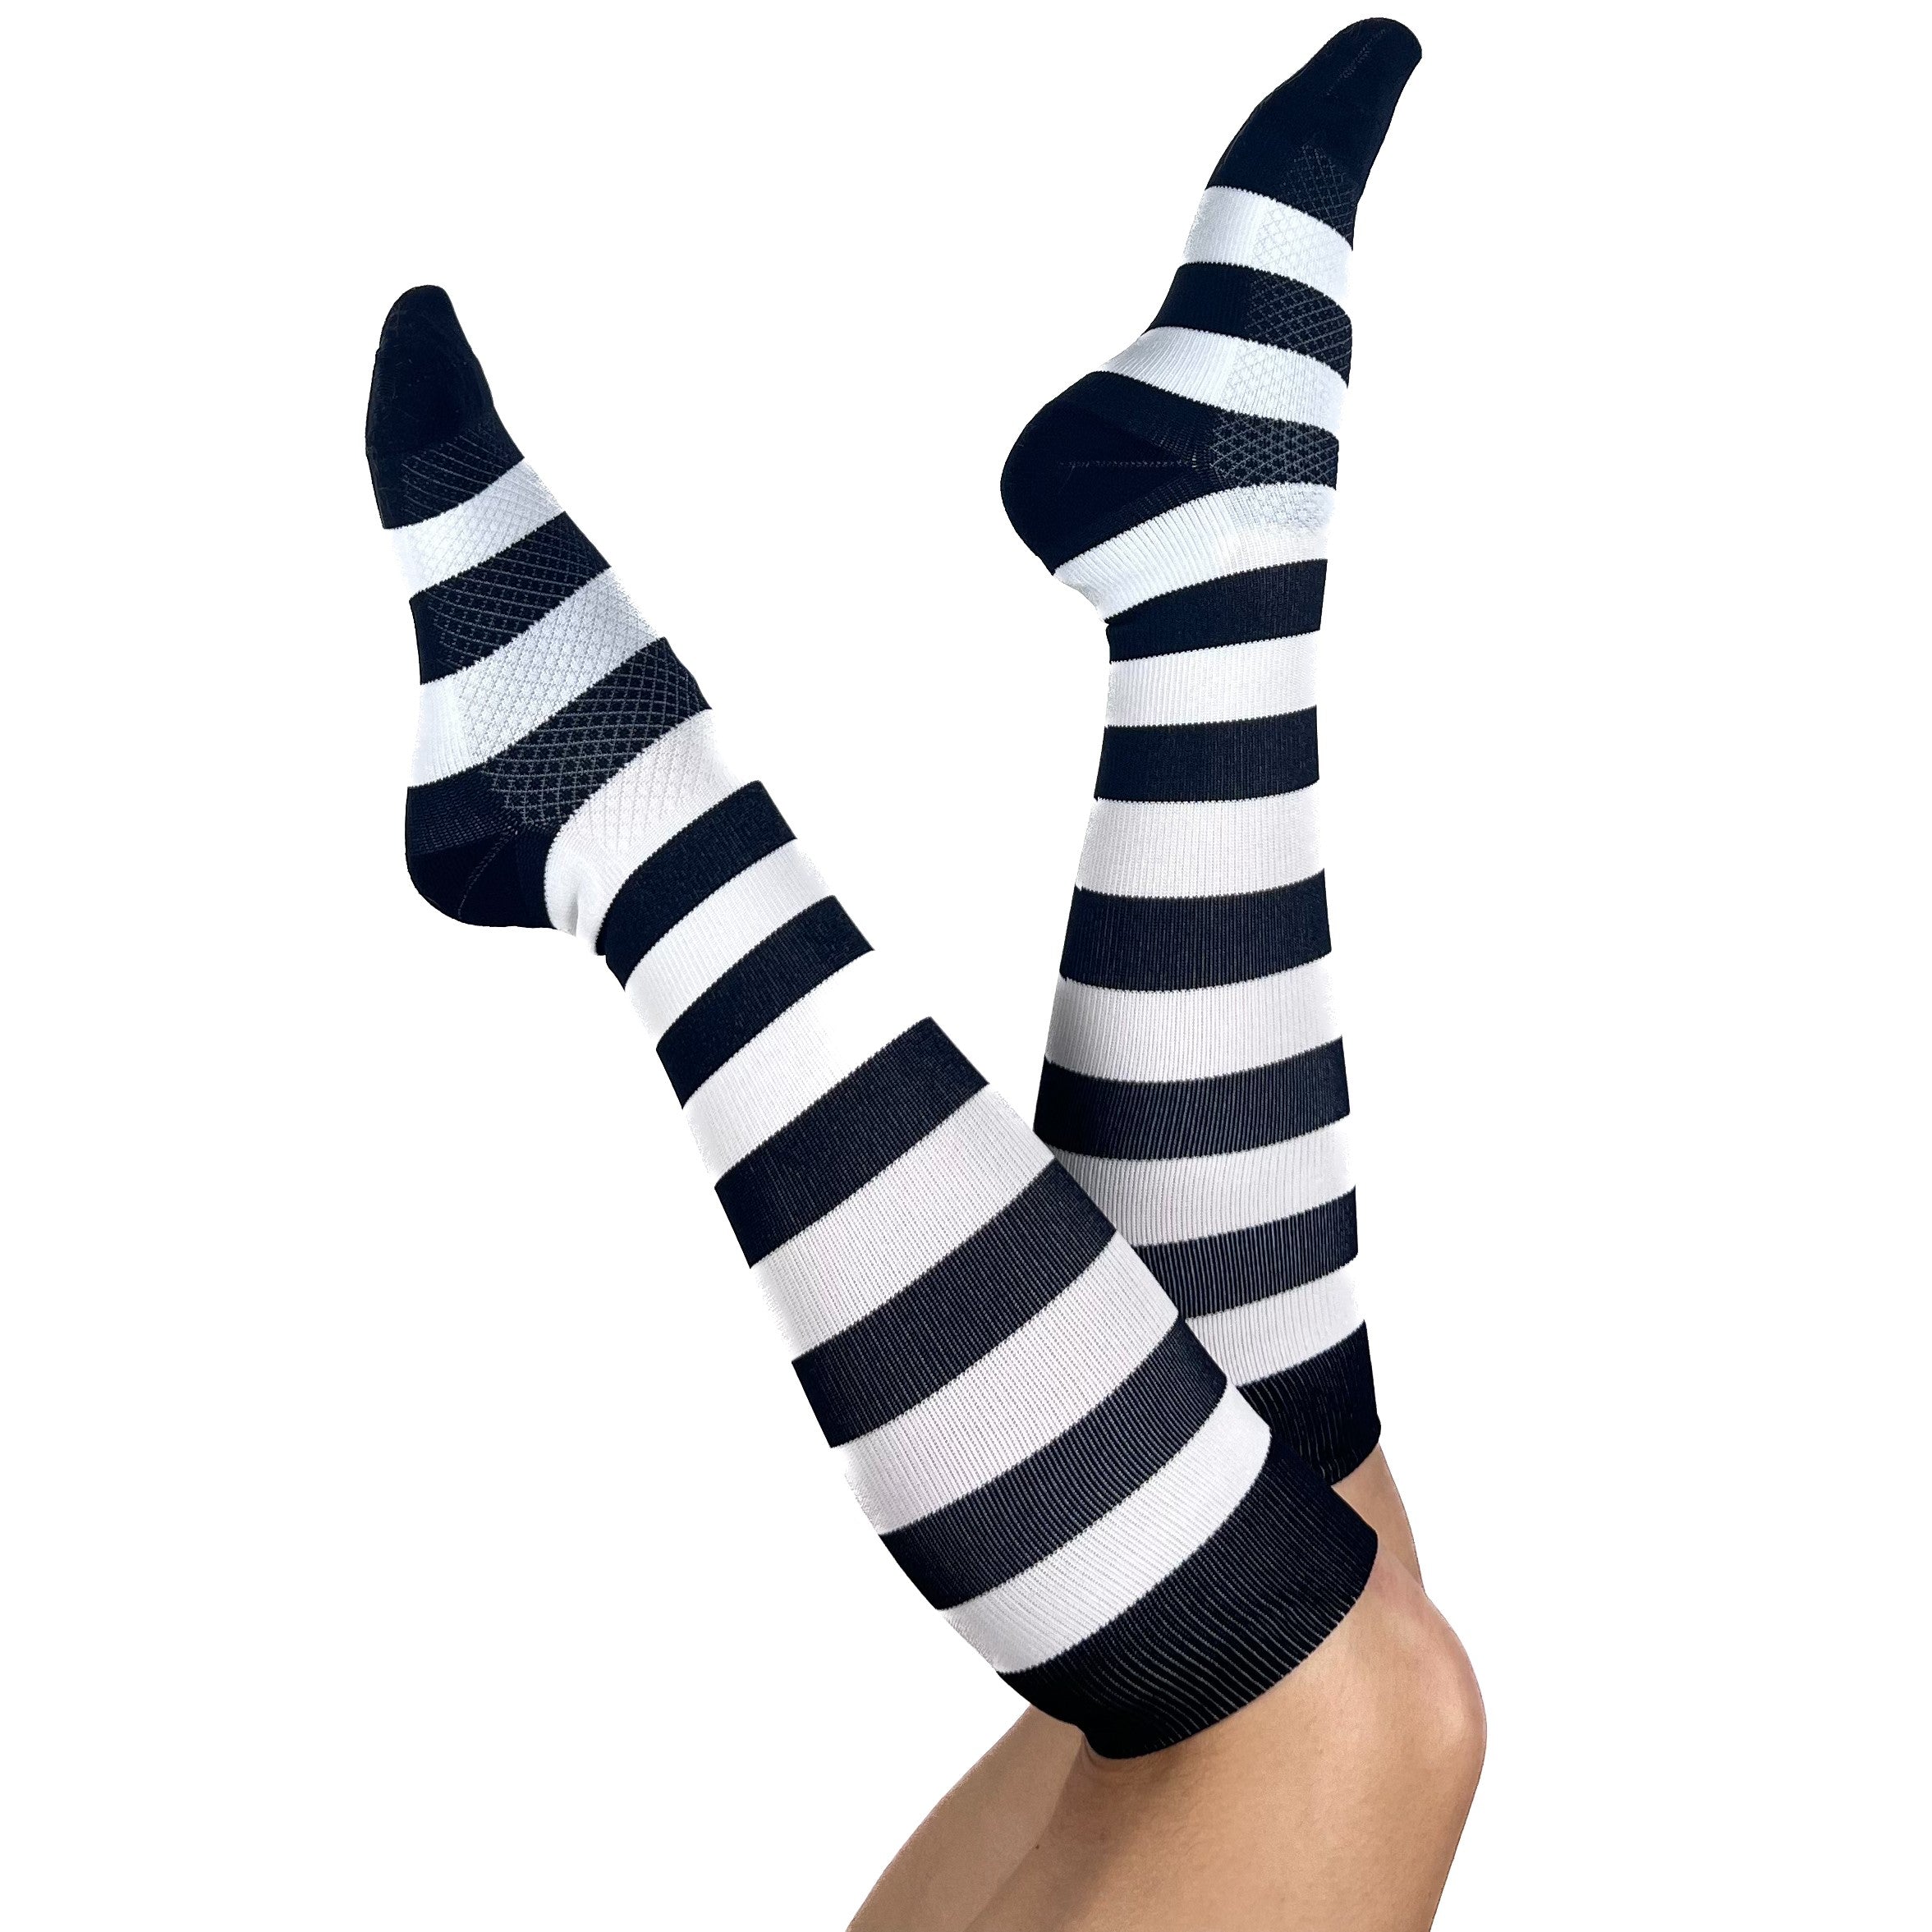 Black and White Striped Compression Socks | Knee High